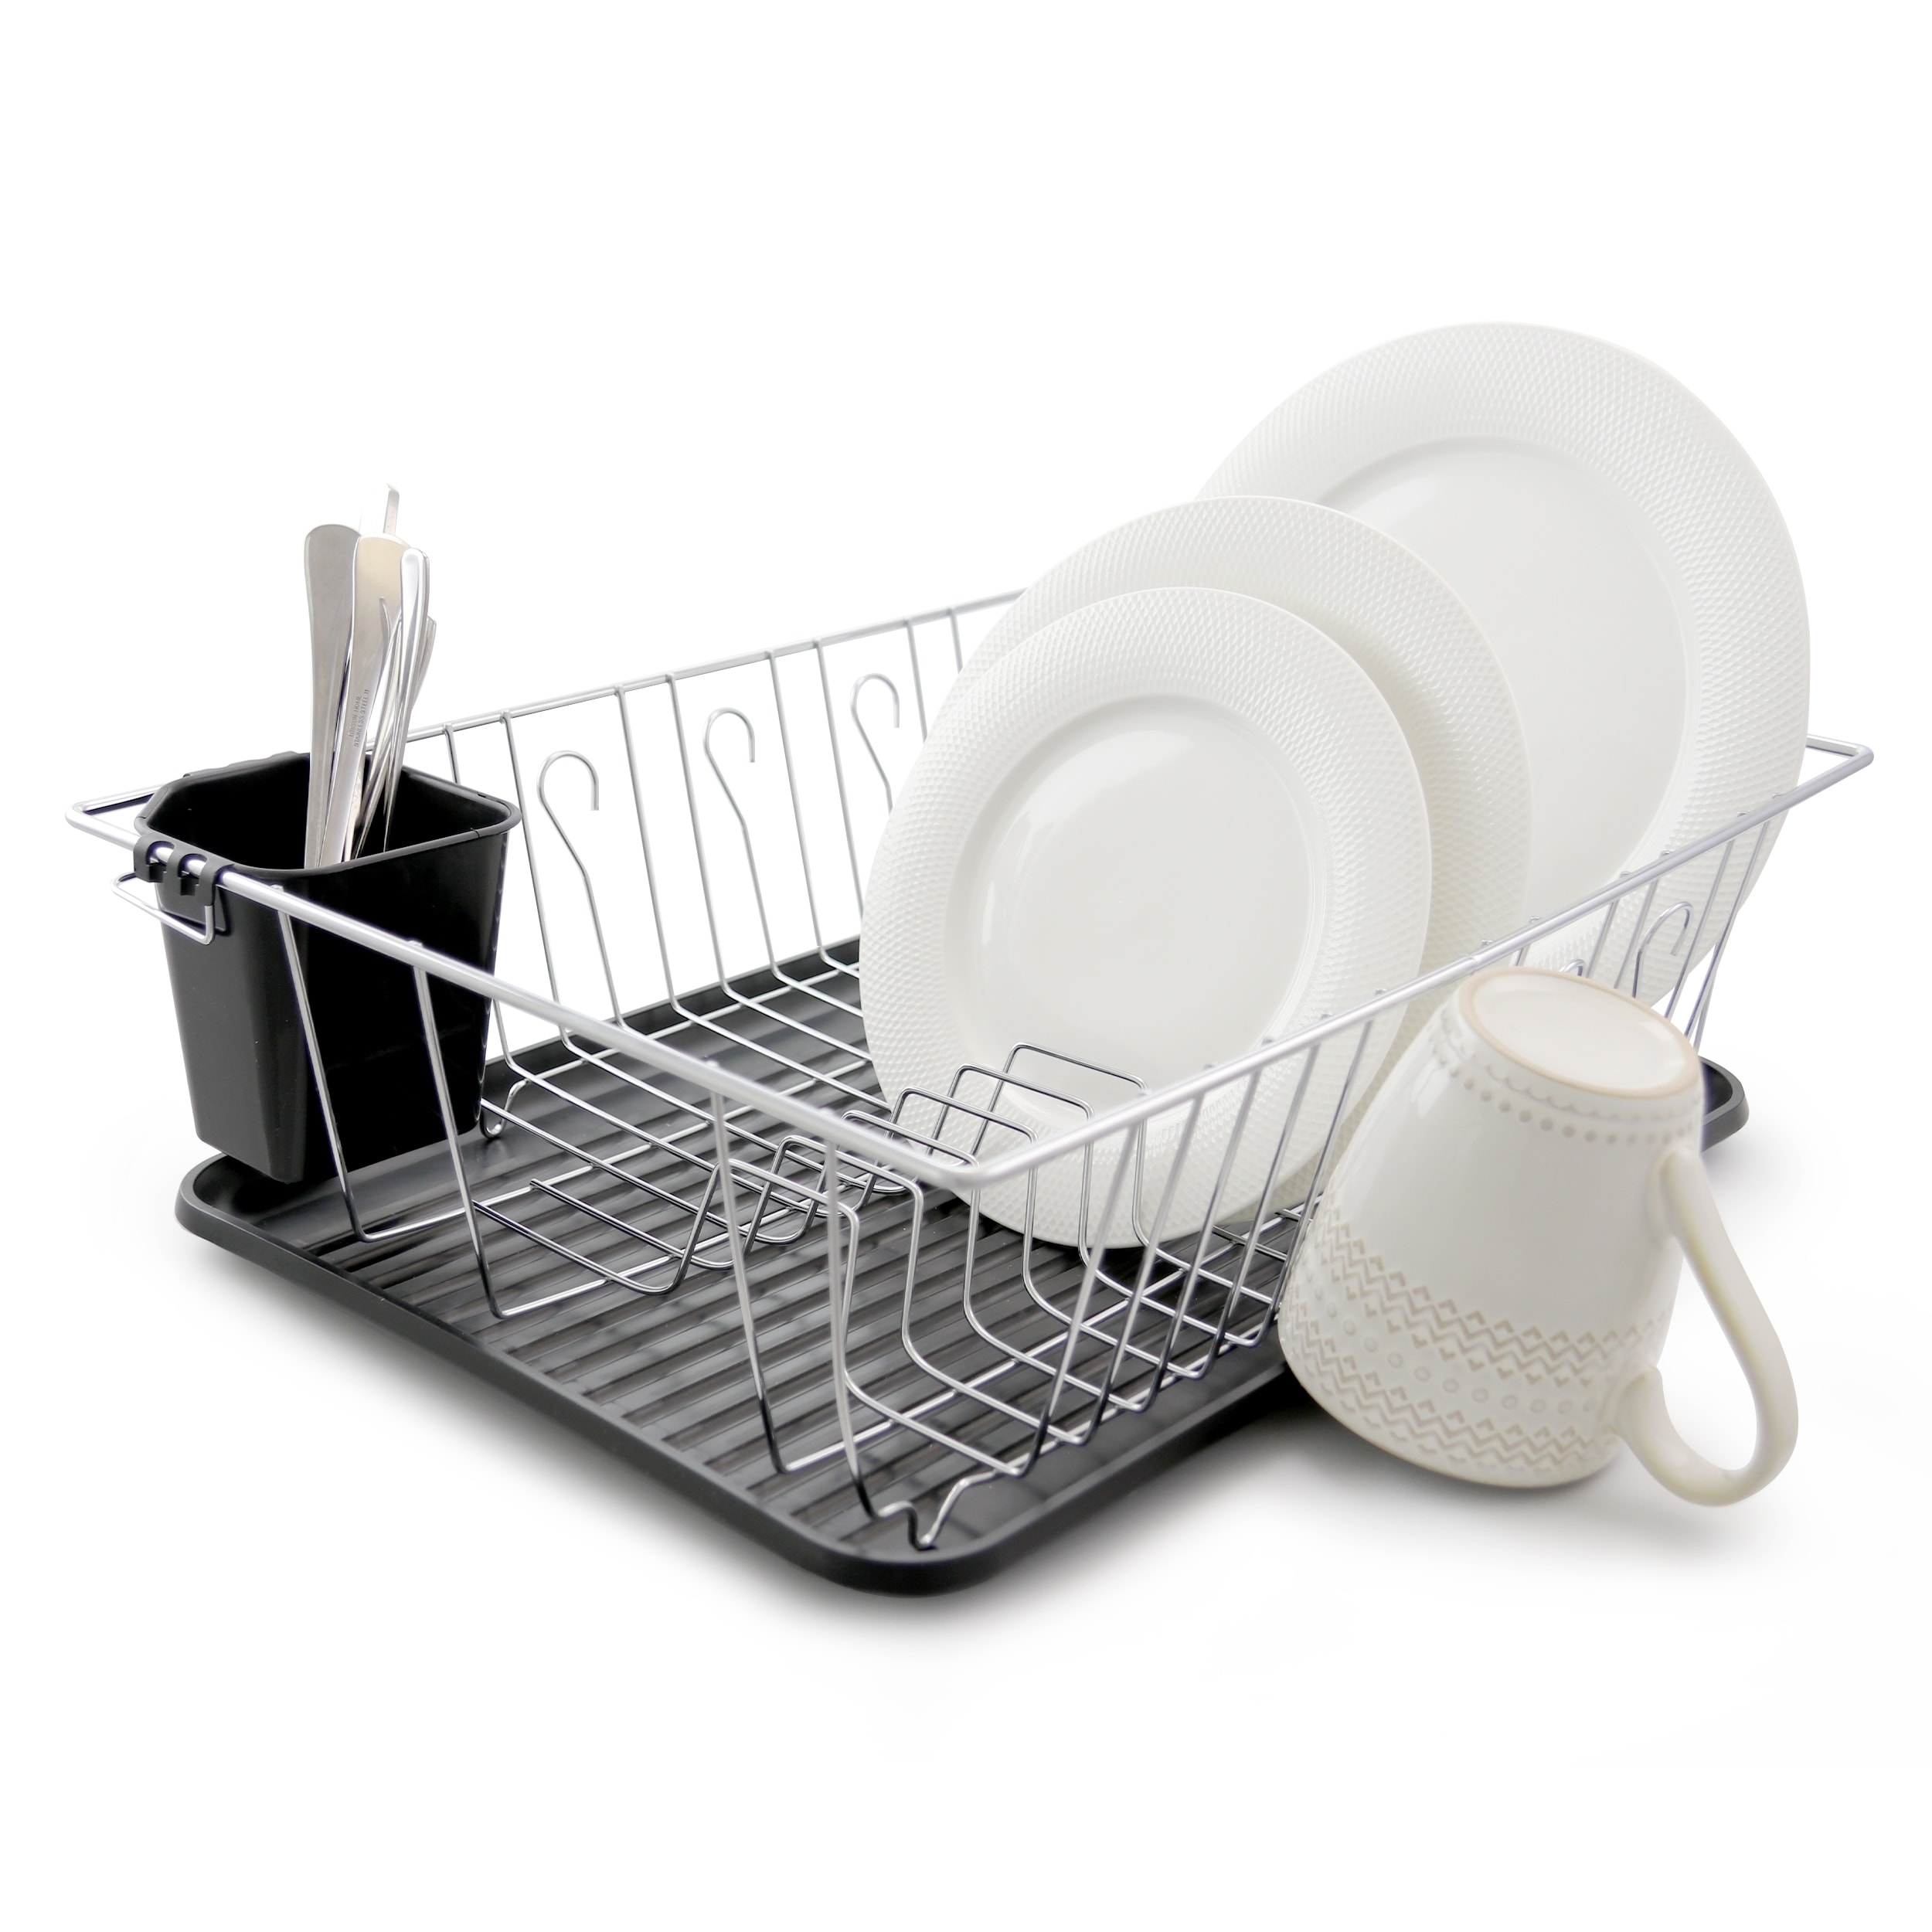 https://ak1.ostkcdn.com/images/products/is/images/direct/51a53120ad54c7bfdbd3238d3a851bf38fa414e2/Better-Chef-22-Inch-Chrome-Dish-Rack-with-Black-Draining-Tray.jpg